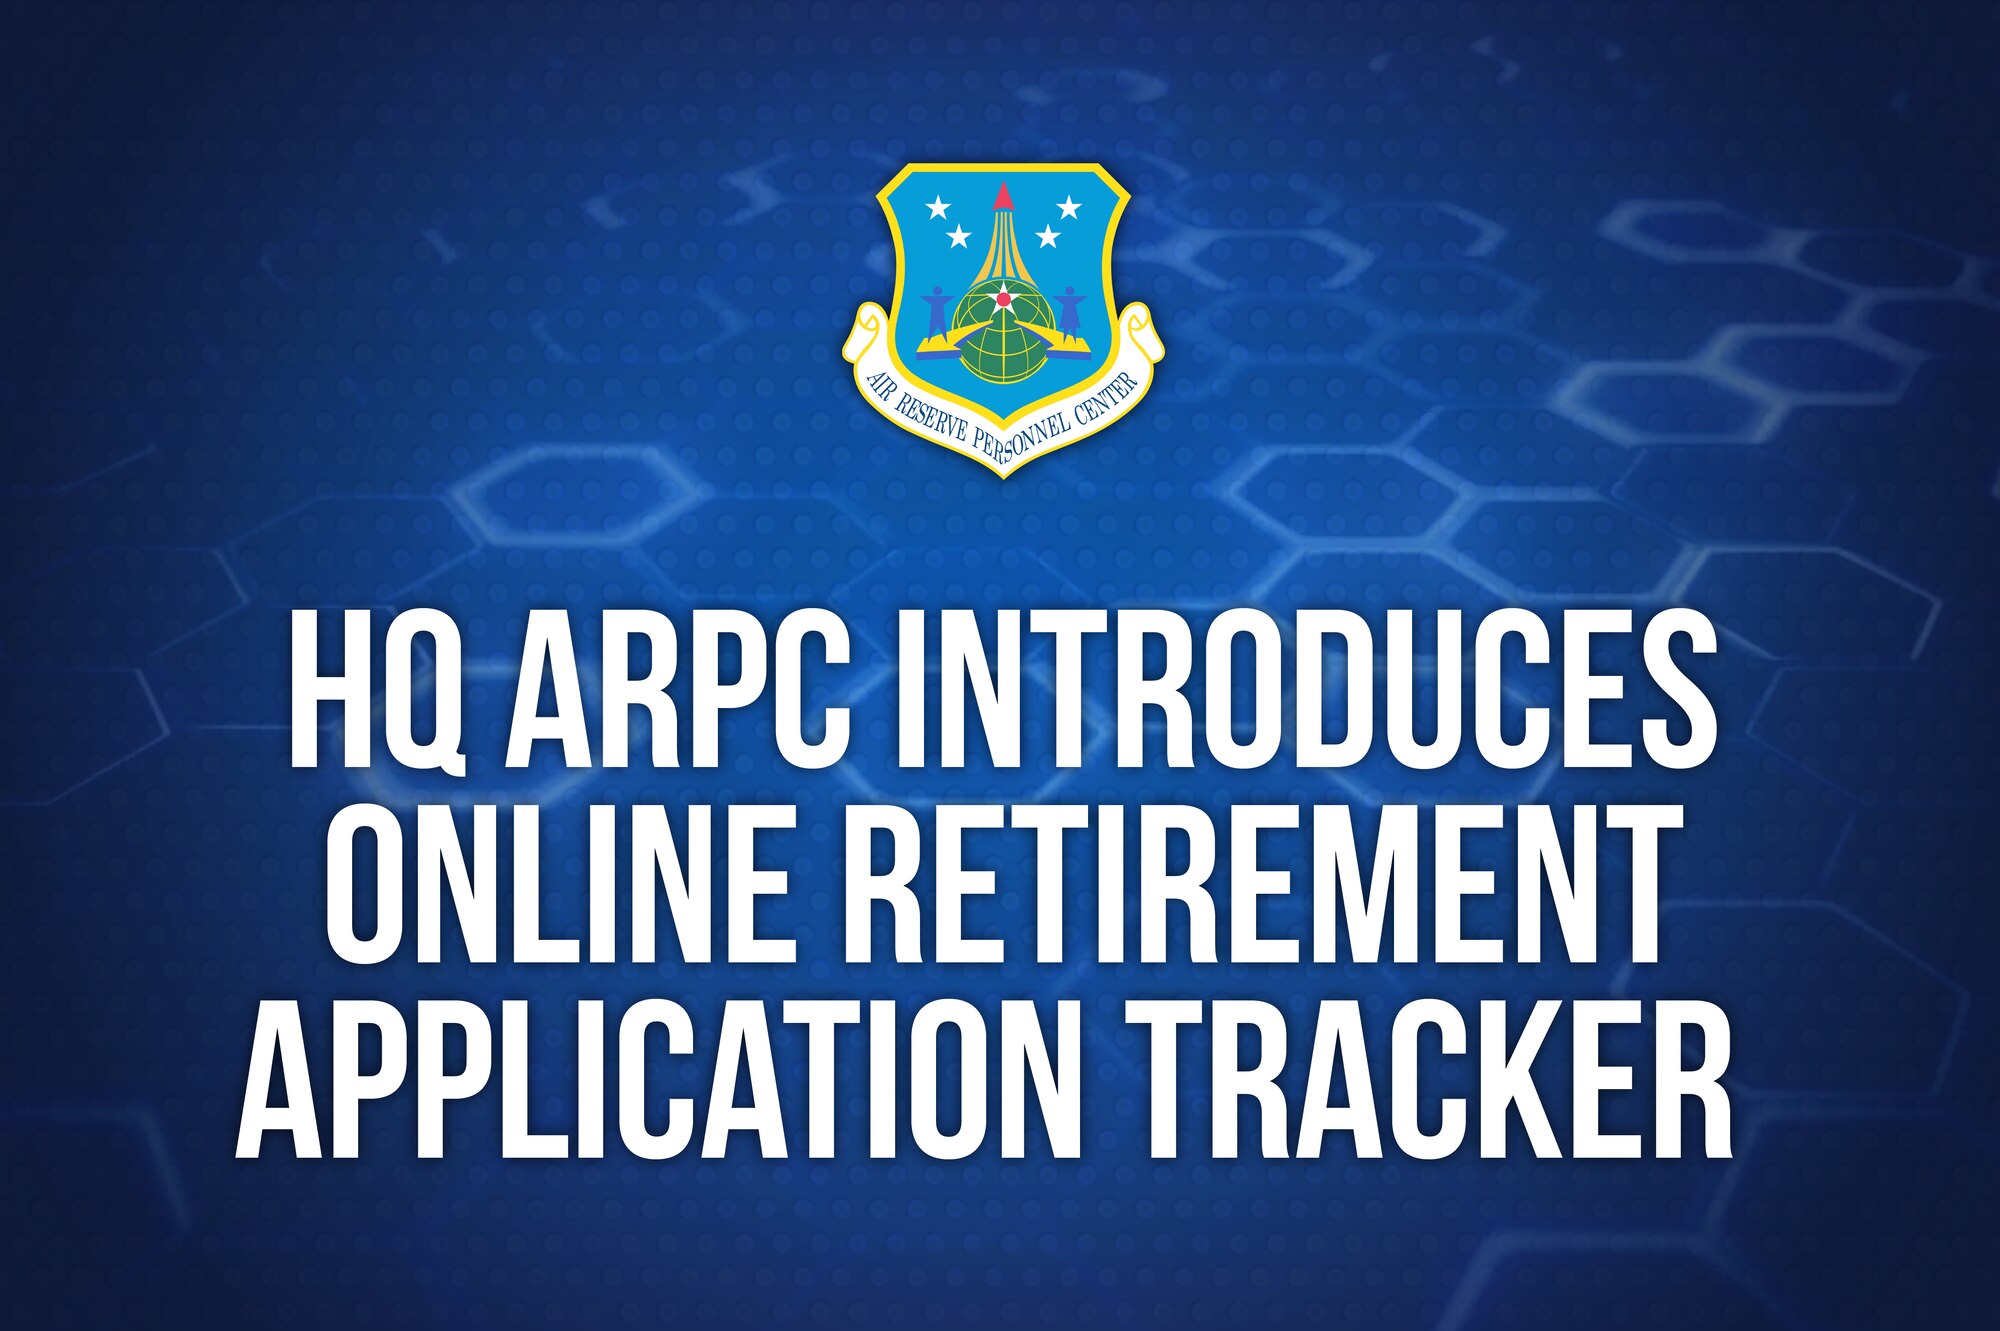 The retirement application tracker found in vPC allows retirees to view their retirement pay application as it is processed from HQ ARPC to DFAS. To view the tracker, applicants must navigate to the Action Requests tab and select the Retirement Application Status link. In addition to step by step updates, the tracker provides a DFAS tracking number to inquire about retirement pay issues after the application passes from HQ ARPC to DFAS.